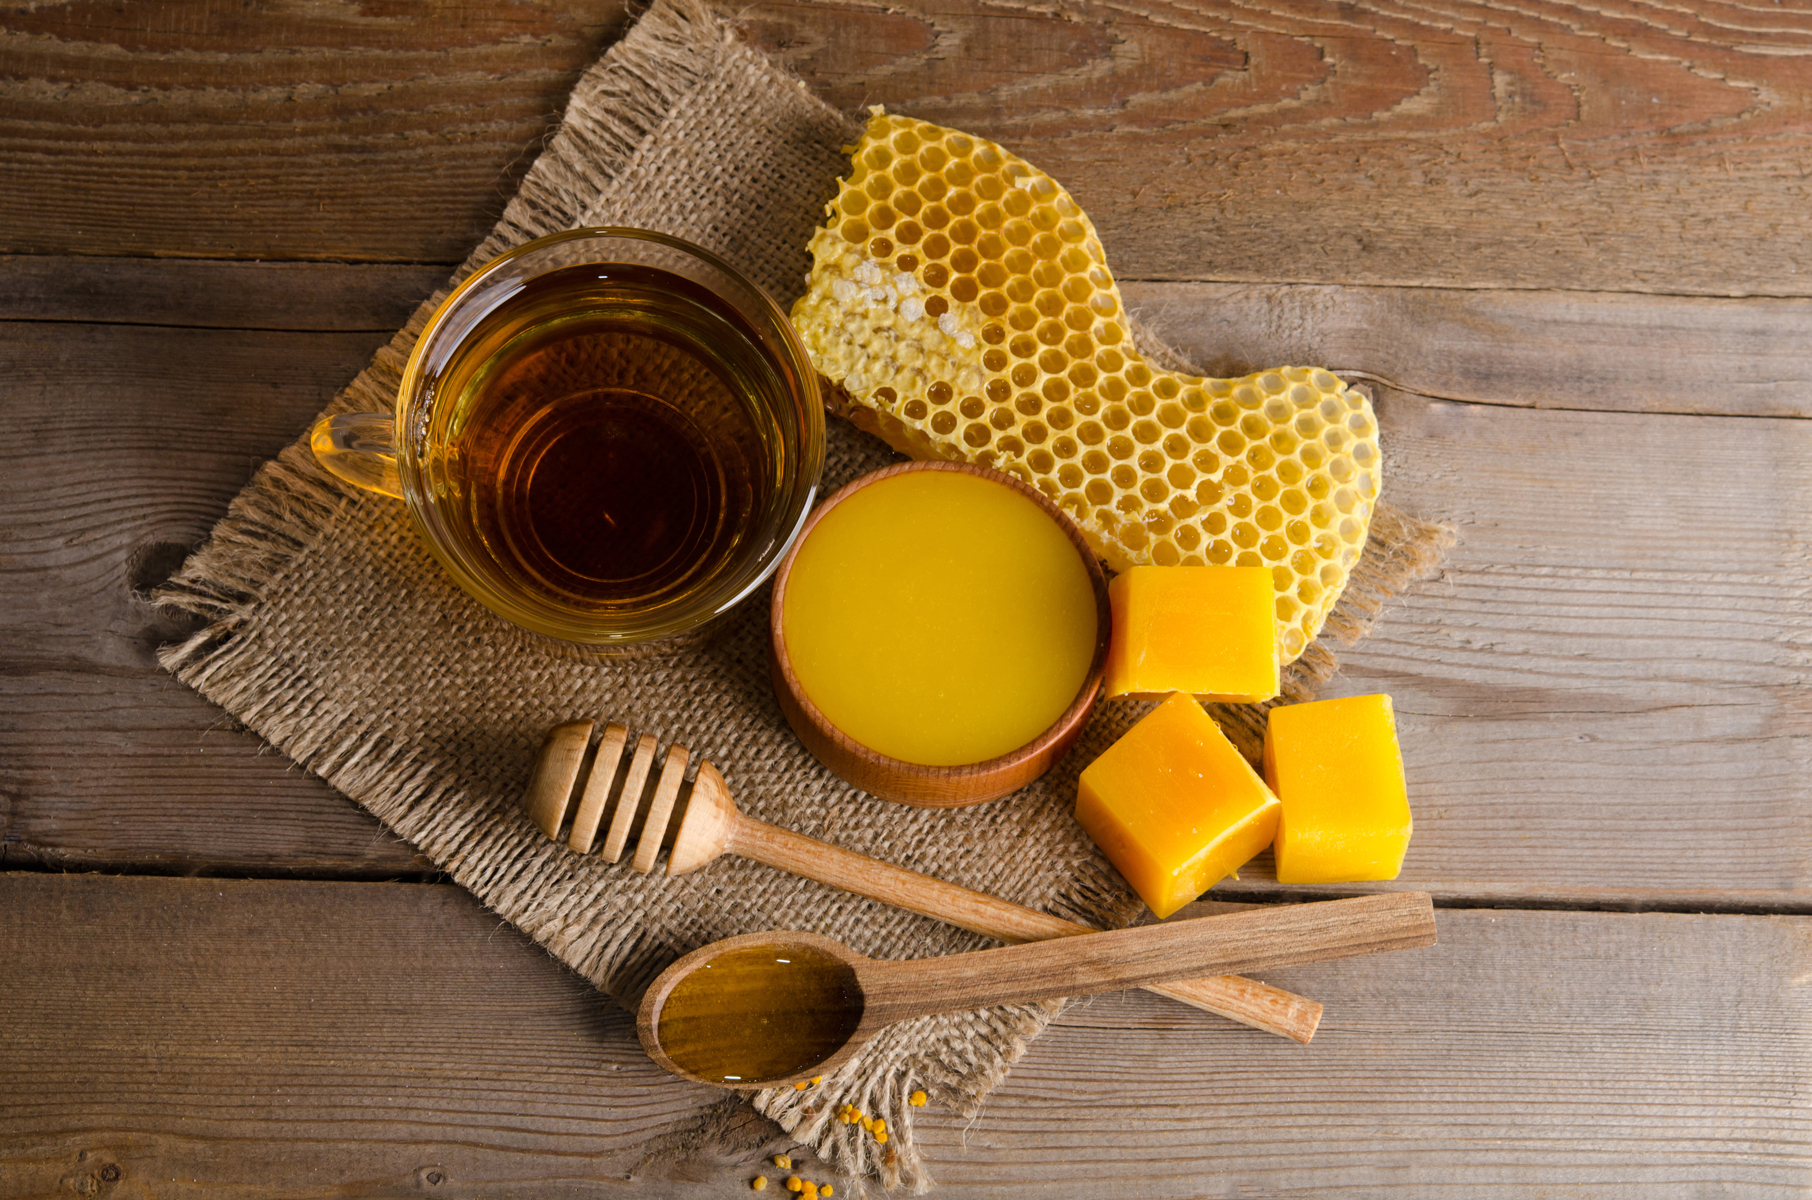 How To Use Beeswax